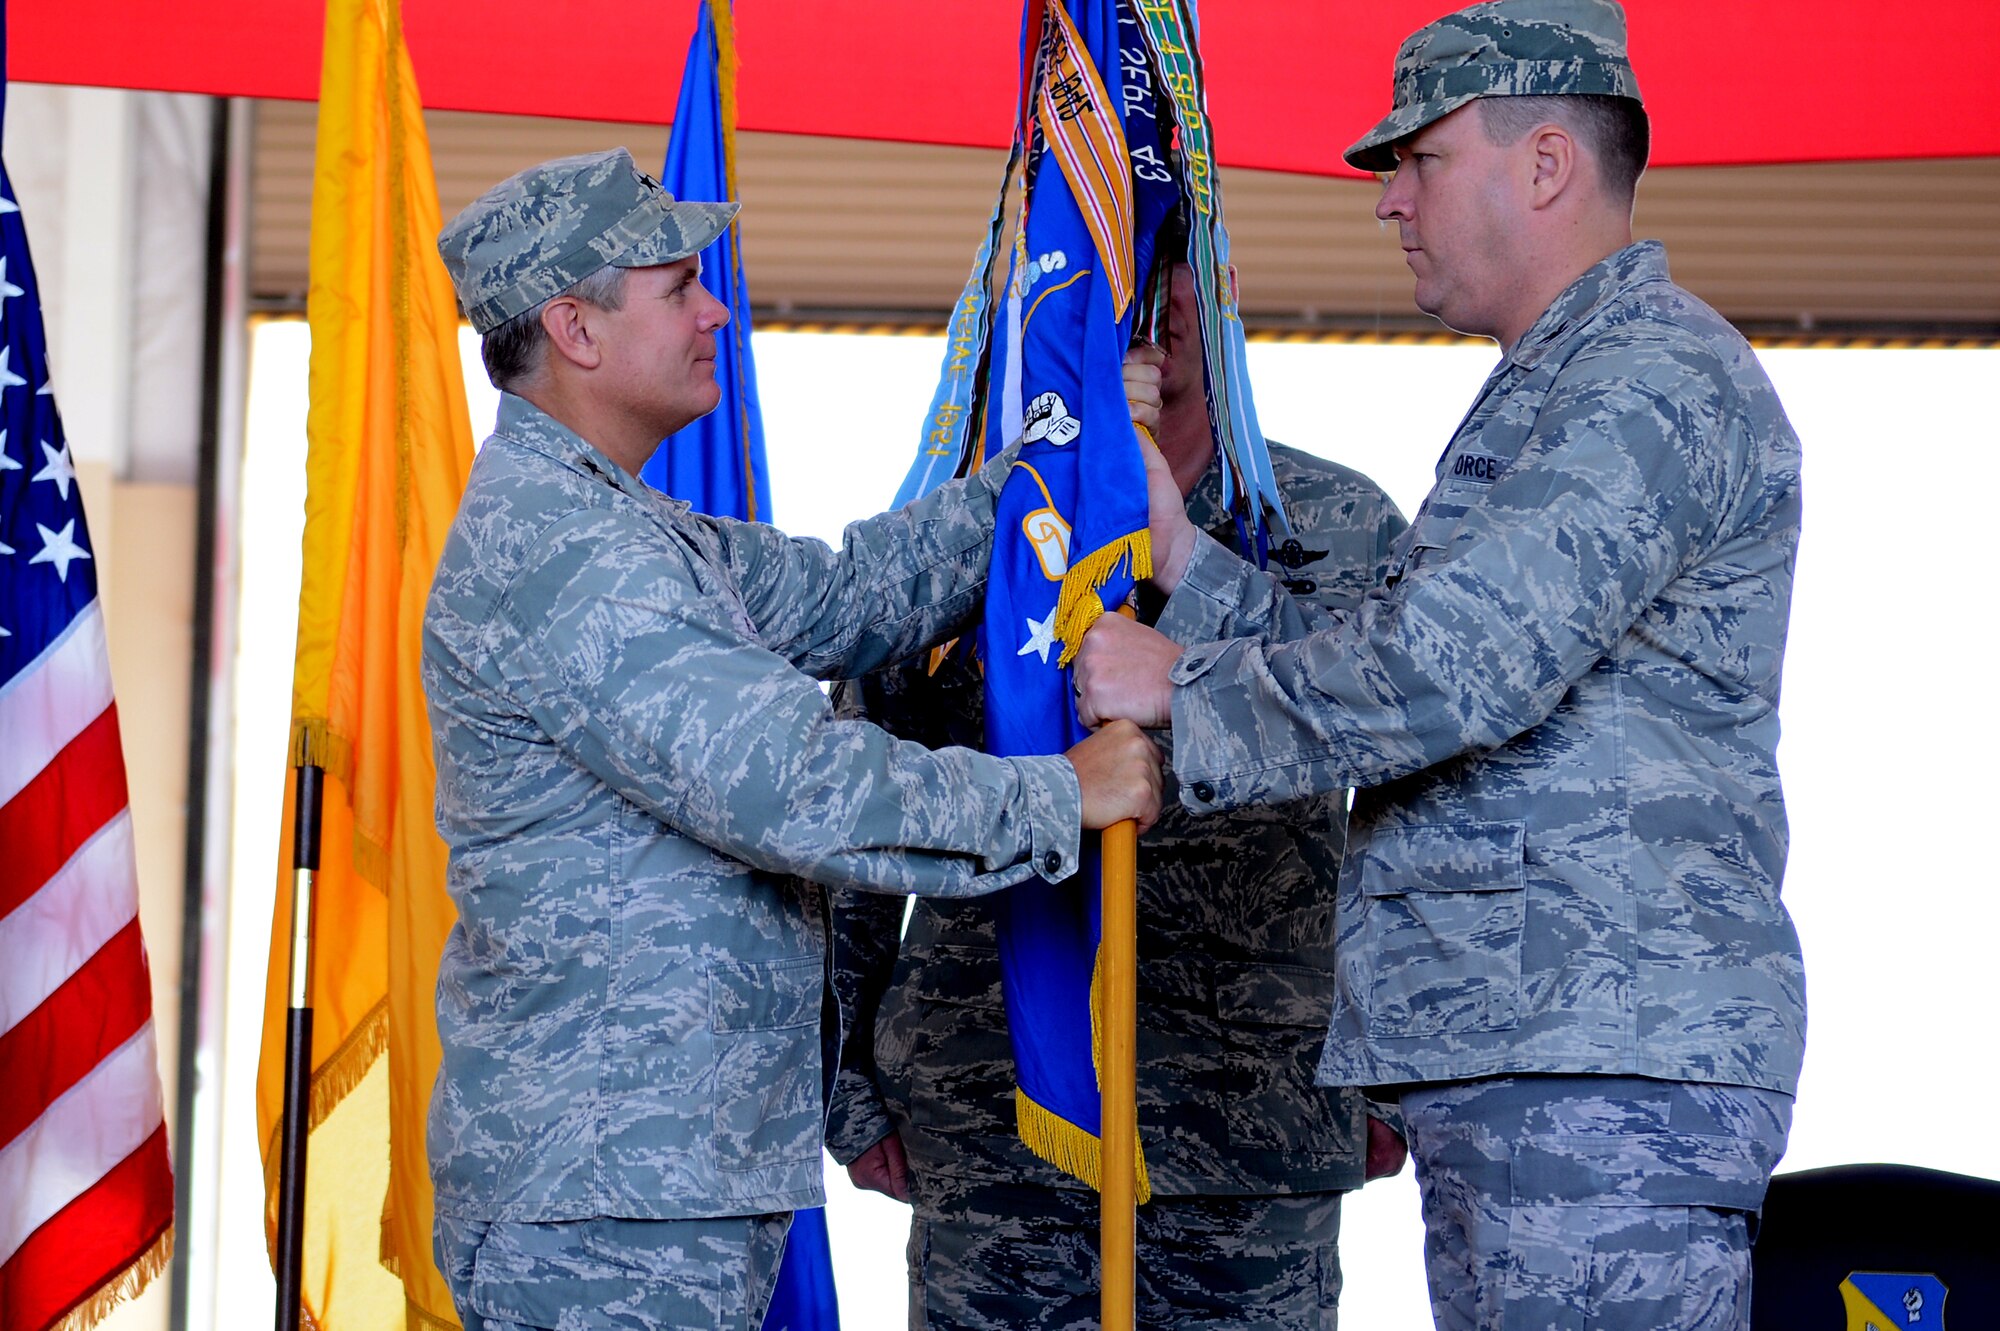 U.S. Air Force Lt. Gen. Eric Fiel, Air Force Special Operations Command commander, passes the guidon to Col. Tony Bauernfeind, 27th Special Operations Wing commander, in a change of command ceremony July 23, 2013, at Cannon Air Force Base, N.M. Bauernfeind succeeded Brig. Gen. Buck Elton, who led the wing since July 2011.  (U.S. Air Force photo/Staff Sgt. Matthew Plew)